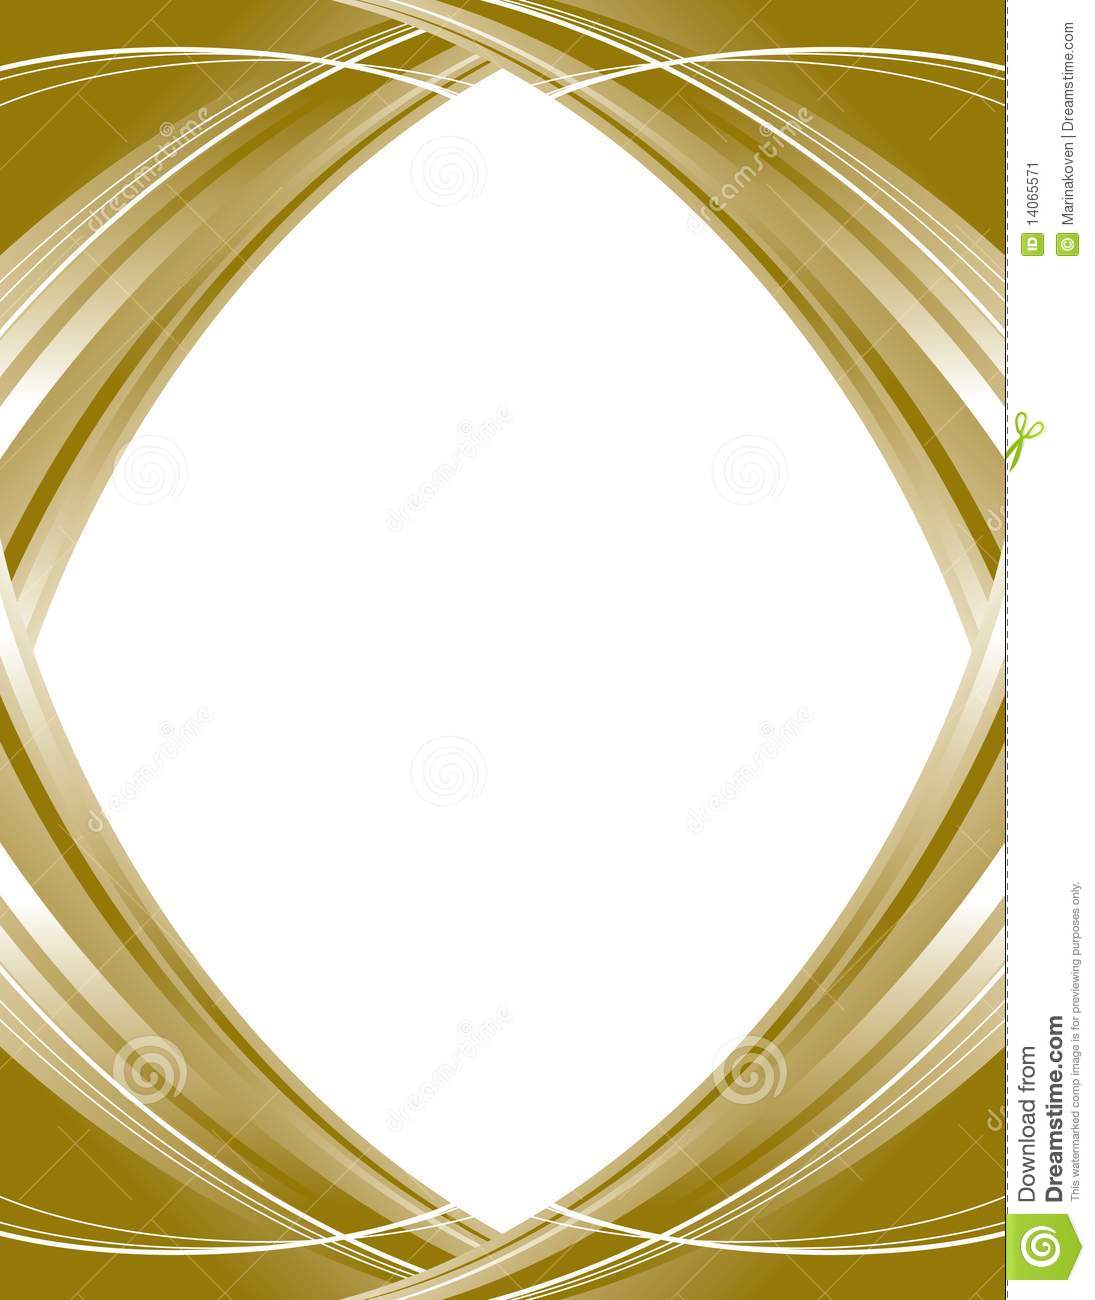 No Gold Abstract Background